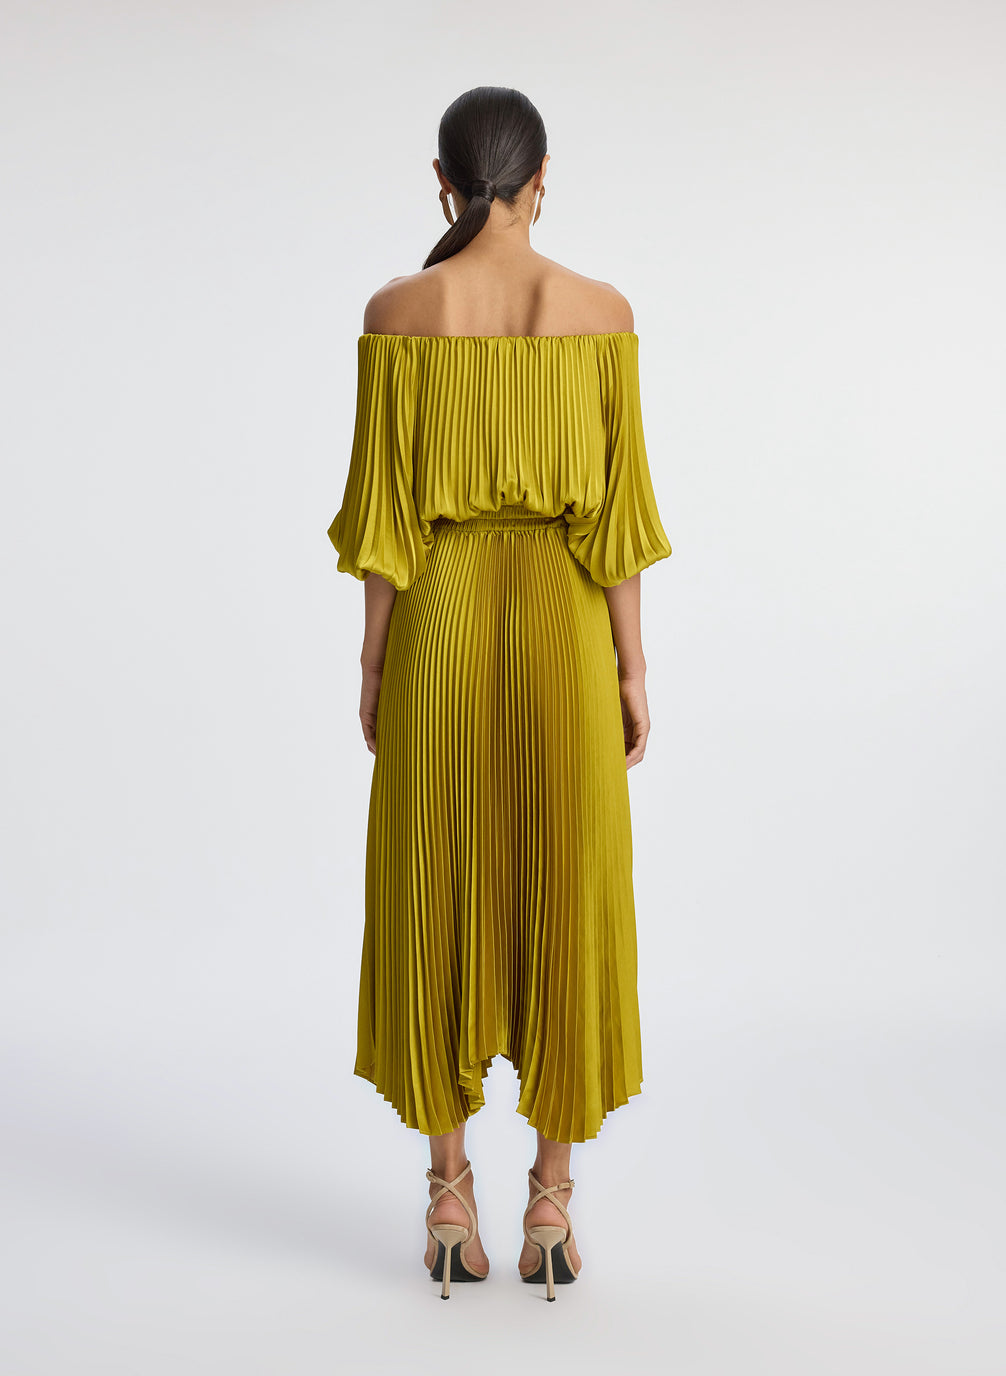 back view of woman wearing yellow pleated off shoulder dress